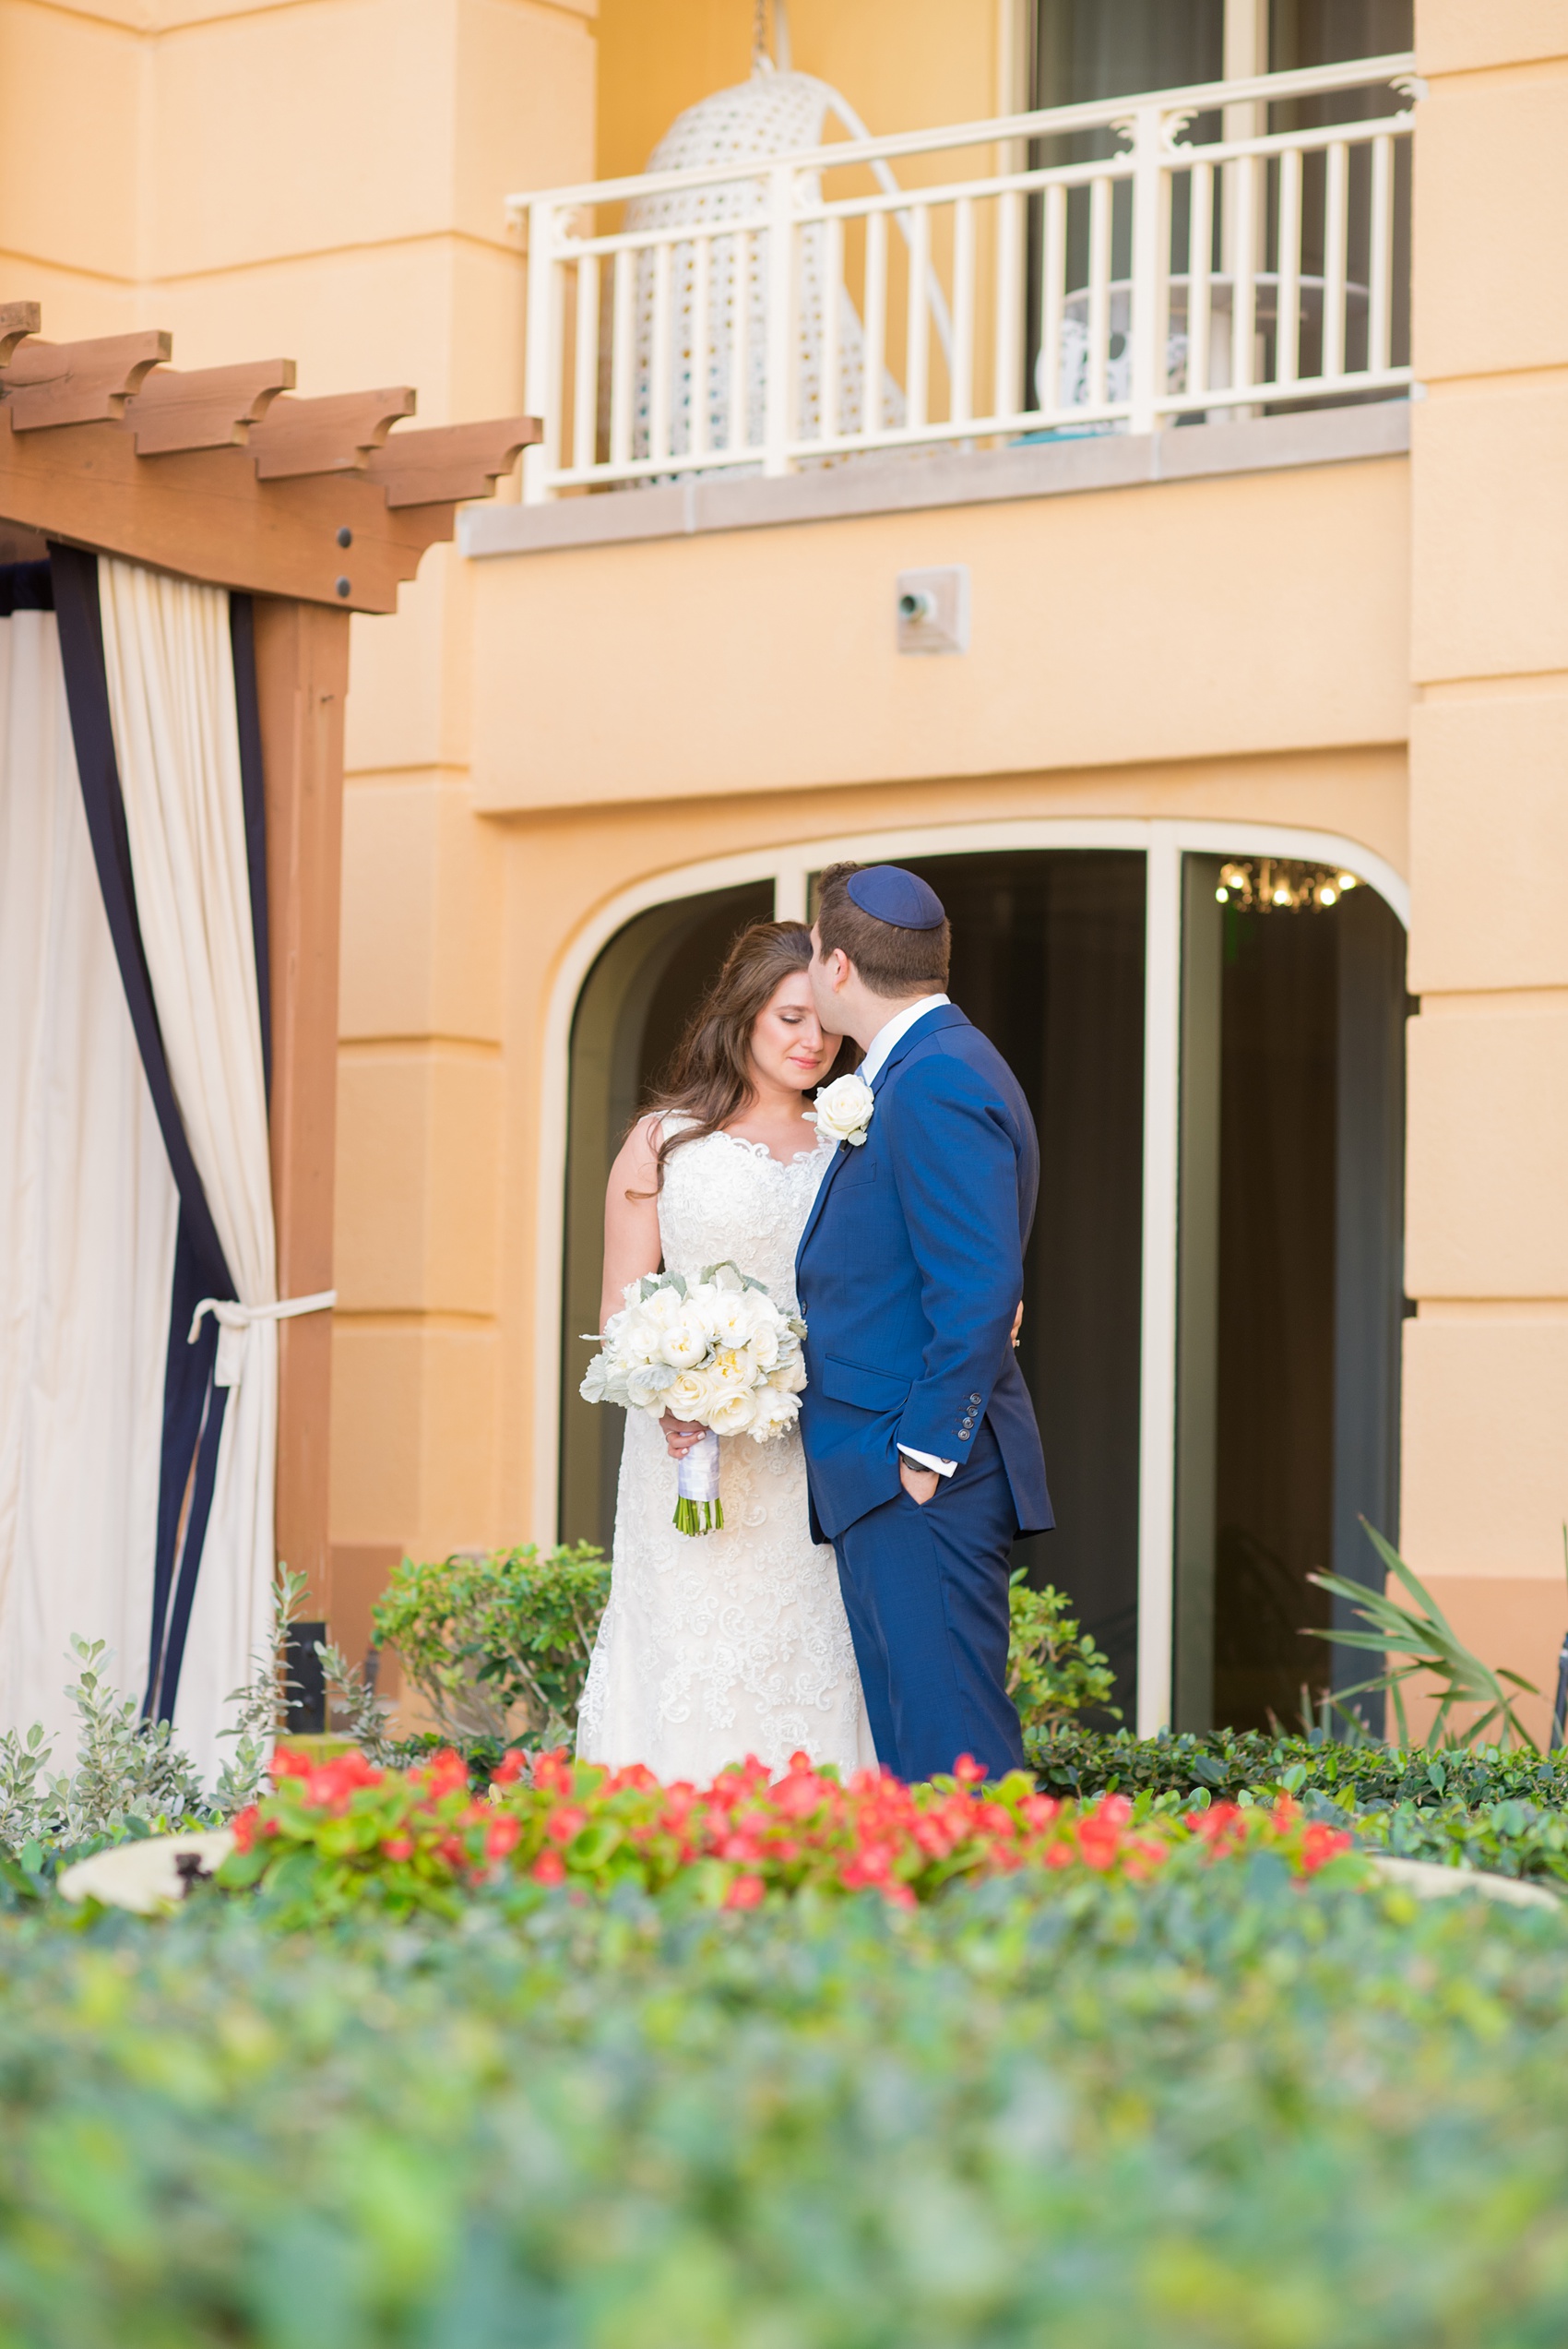 Eau Palm Beach wedding photos by Mikkel Paige Photography. This luxury Florida hotel is a beautiful location for a destination wedding. The bride and groom took pictures around the resort before their ceremony. Click through to see more! #WestPalmBeach #EauPalmBeach #BeachWedding #FloridaWeddings #BeachBride